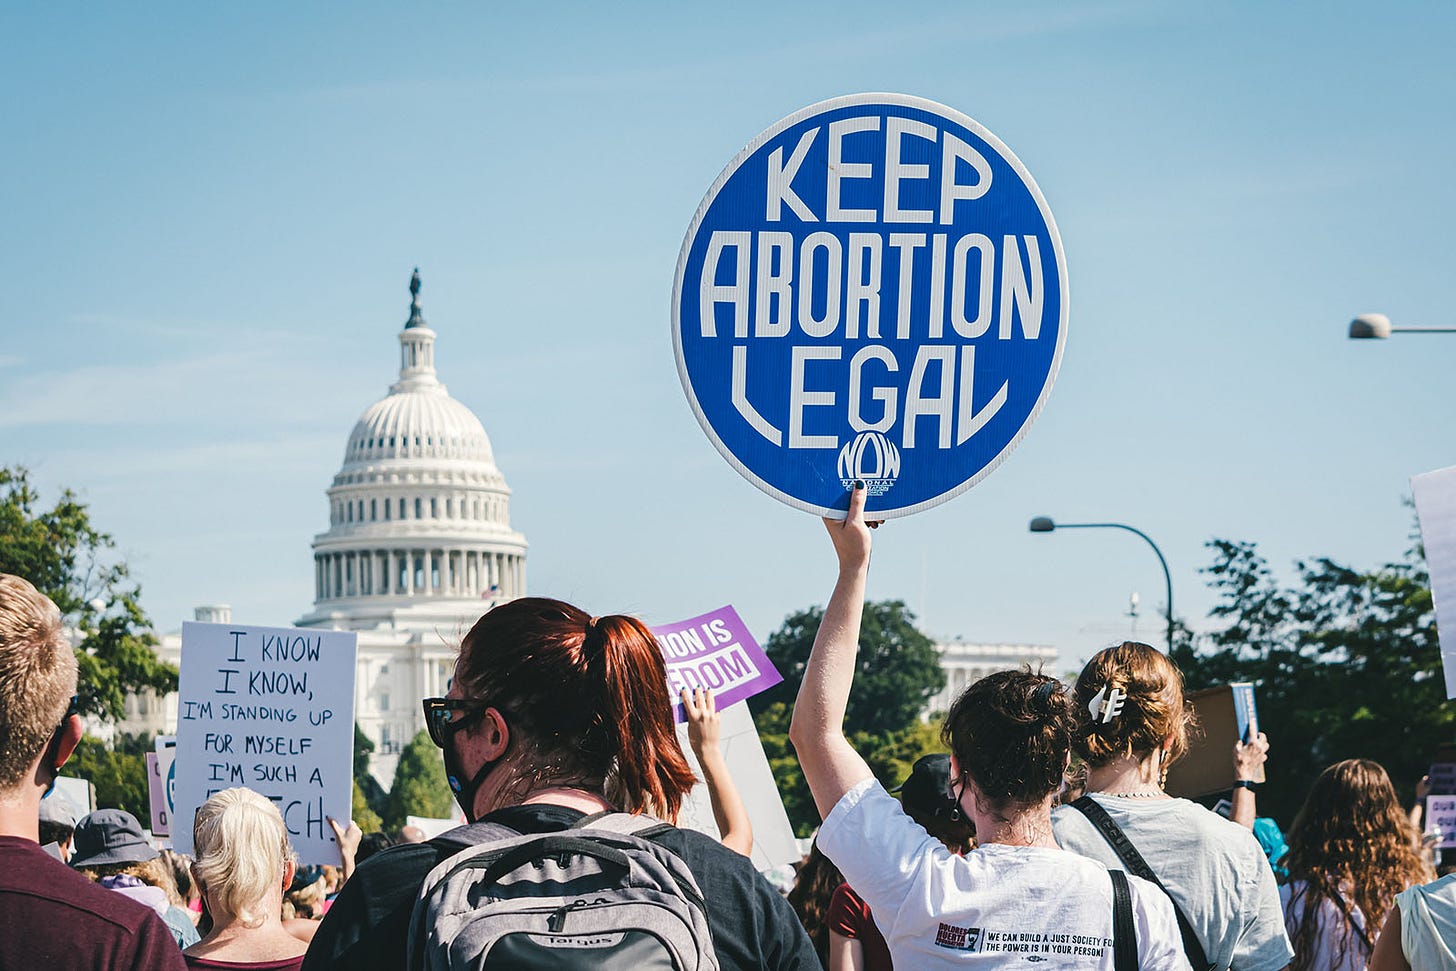 A protestor holding up a "Keep Abortion Legal" sign